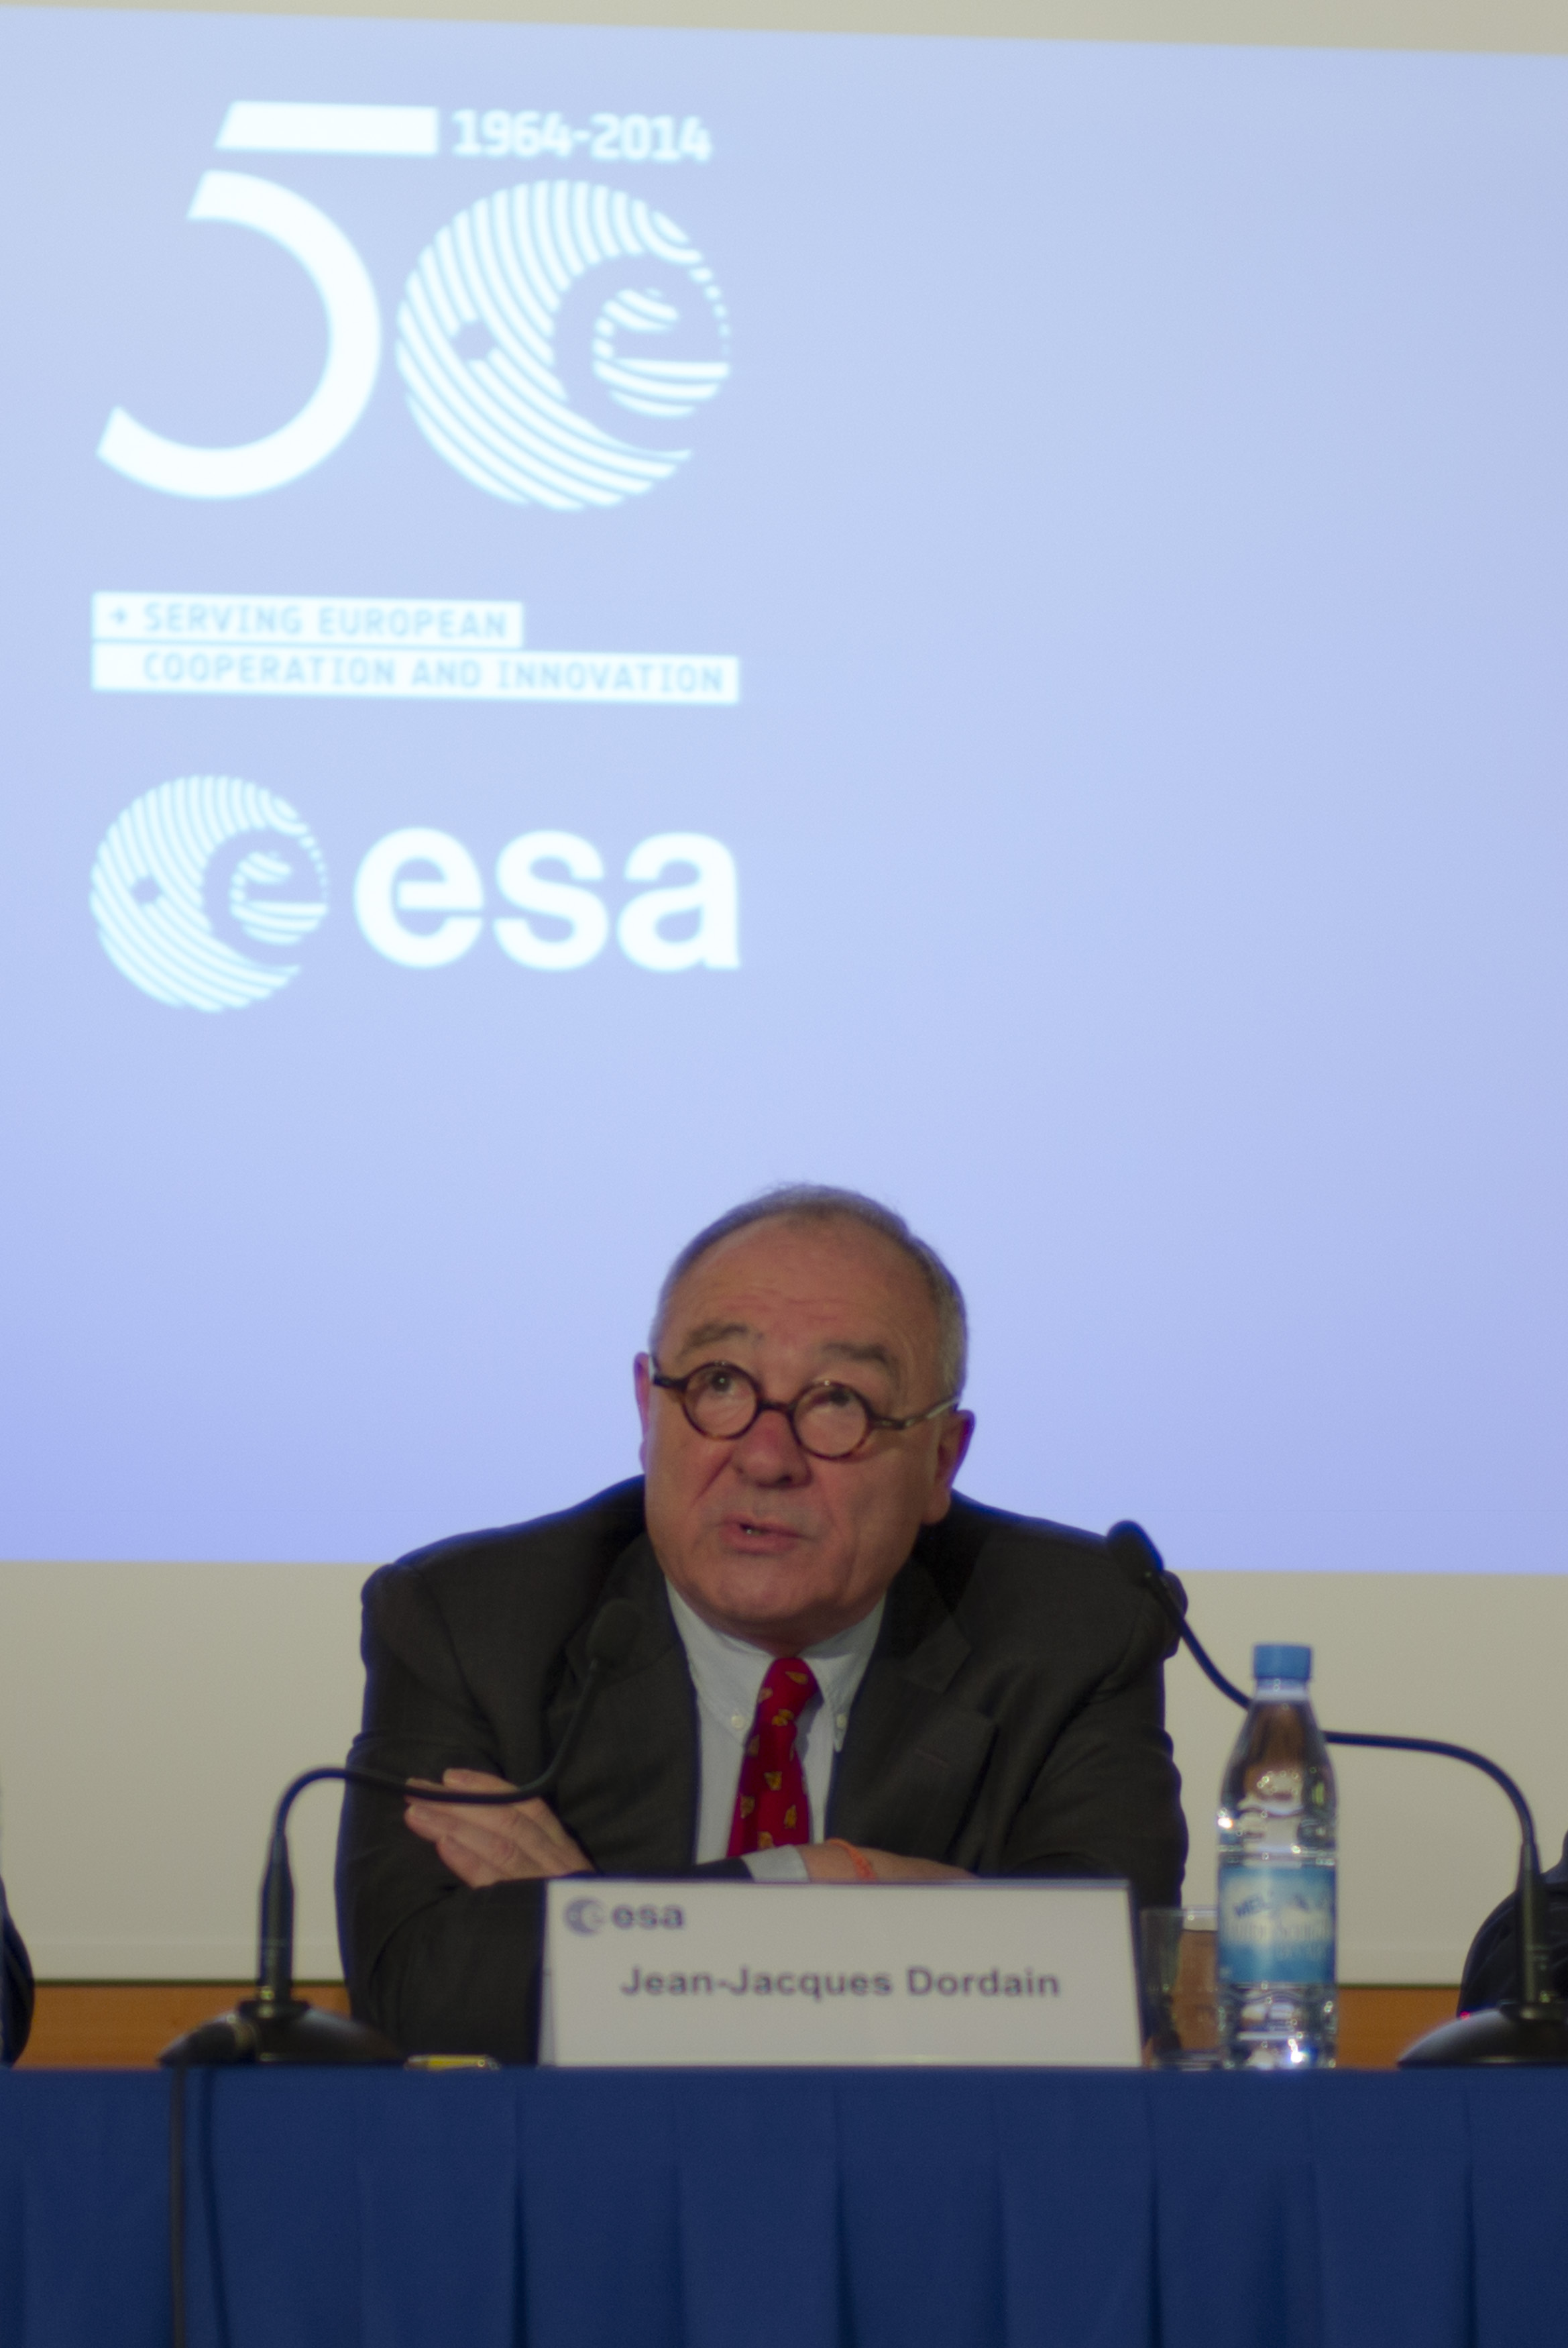 ESA’s Dordain Unapologetic about Galileo at Wide-Ranging Press Conference